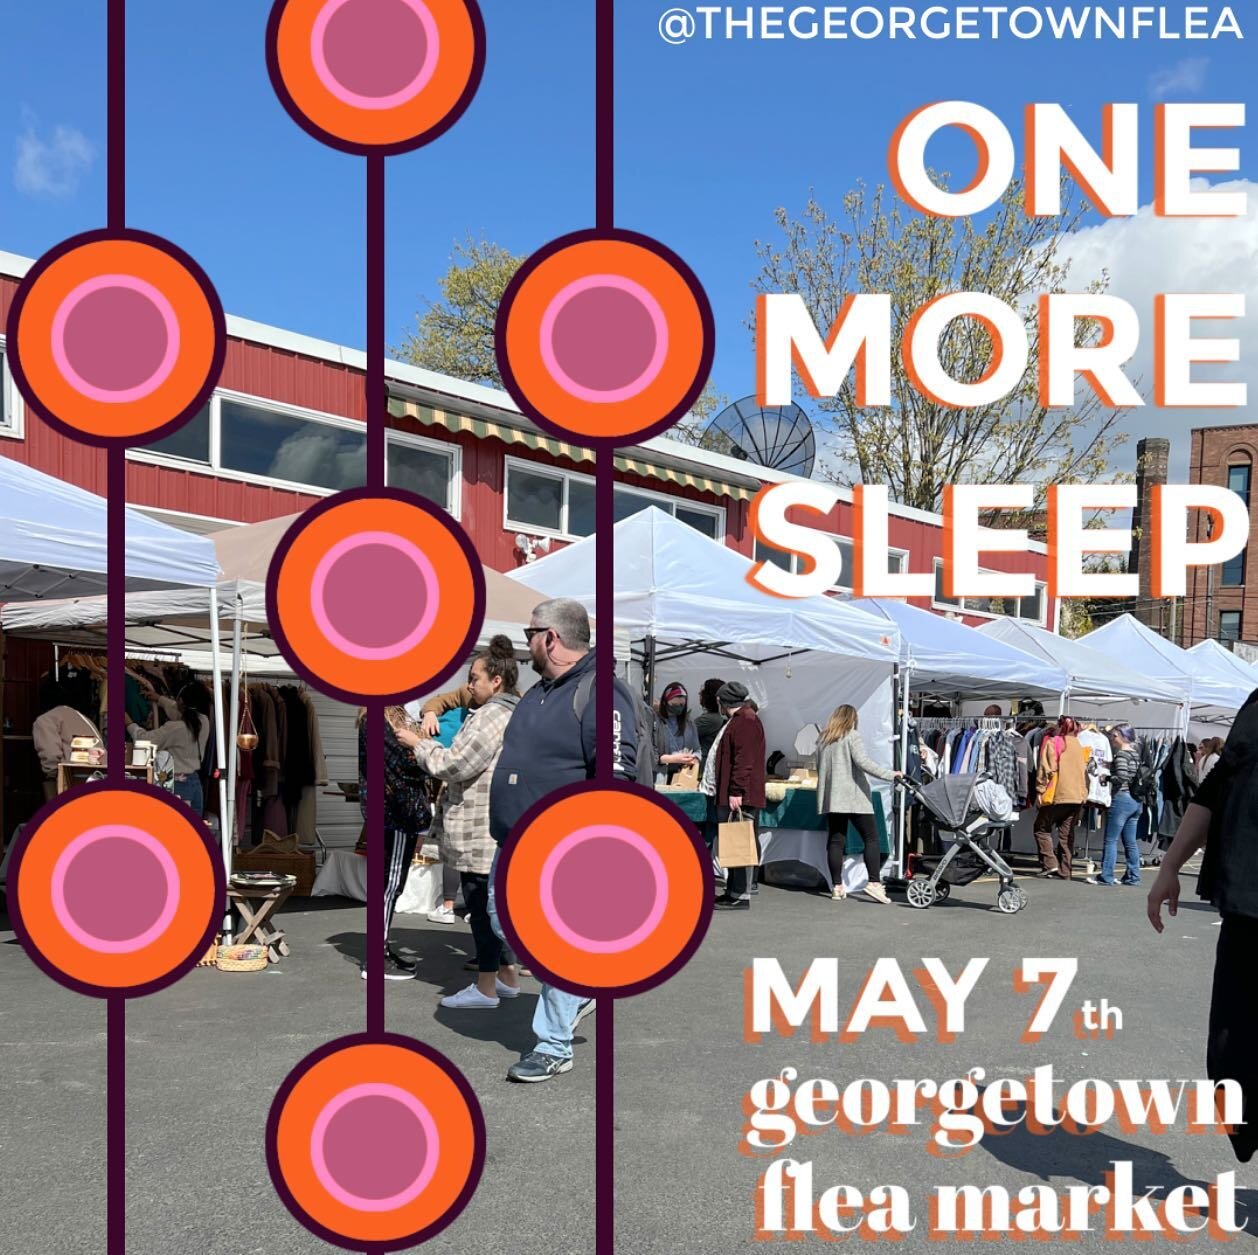 We&rsquo;ve packed our raincoats, but a little moisture won&rsquo;t stop us. We love you Seattle, no matter your weather and we will see you all tomorrow!

Saturday, May 7th from 10-4 Seattle&rsquo;s Newest Flea Market.

Over 80 vendors. Vintage, han